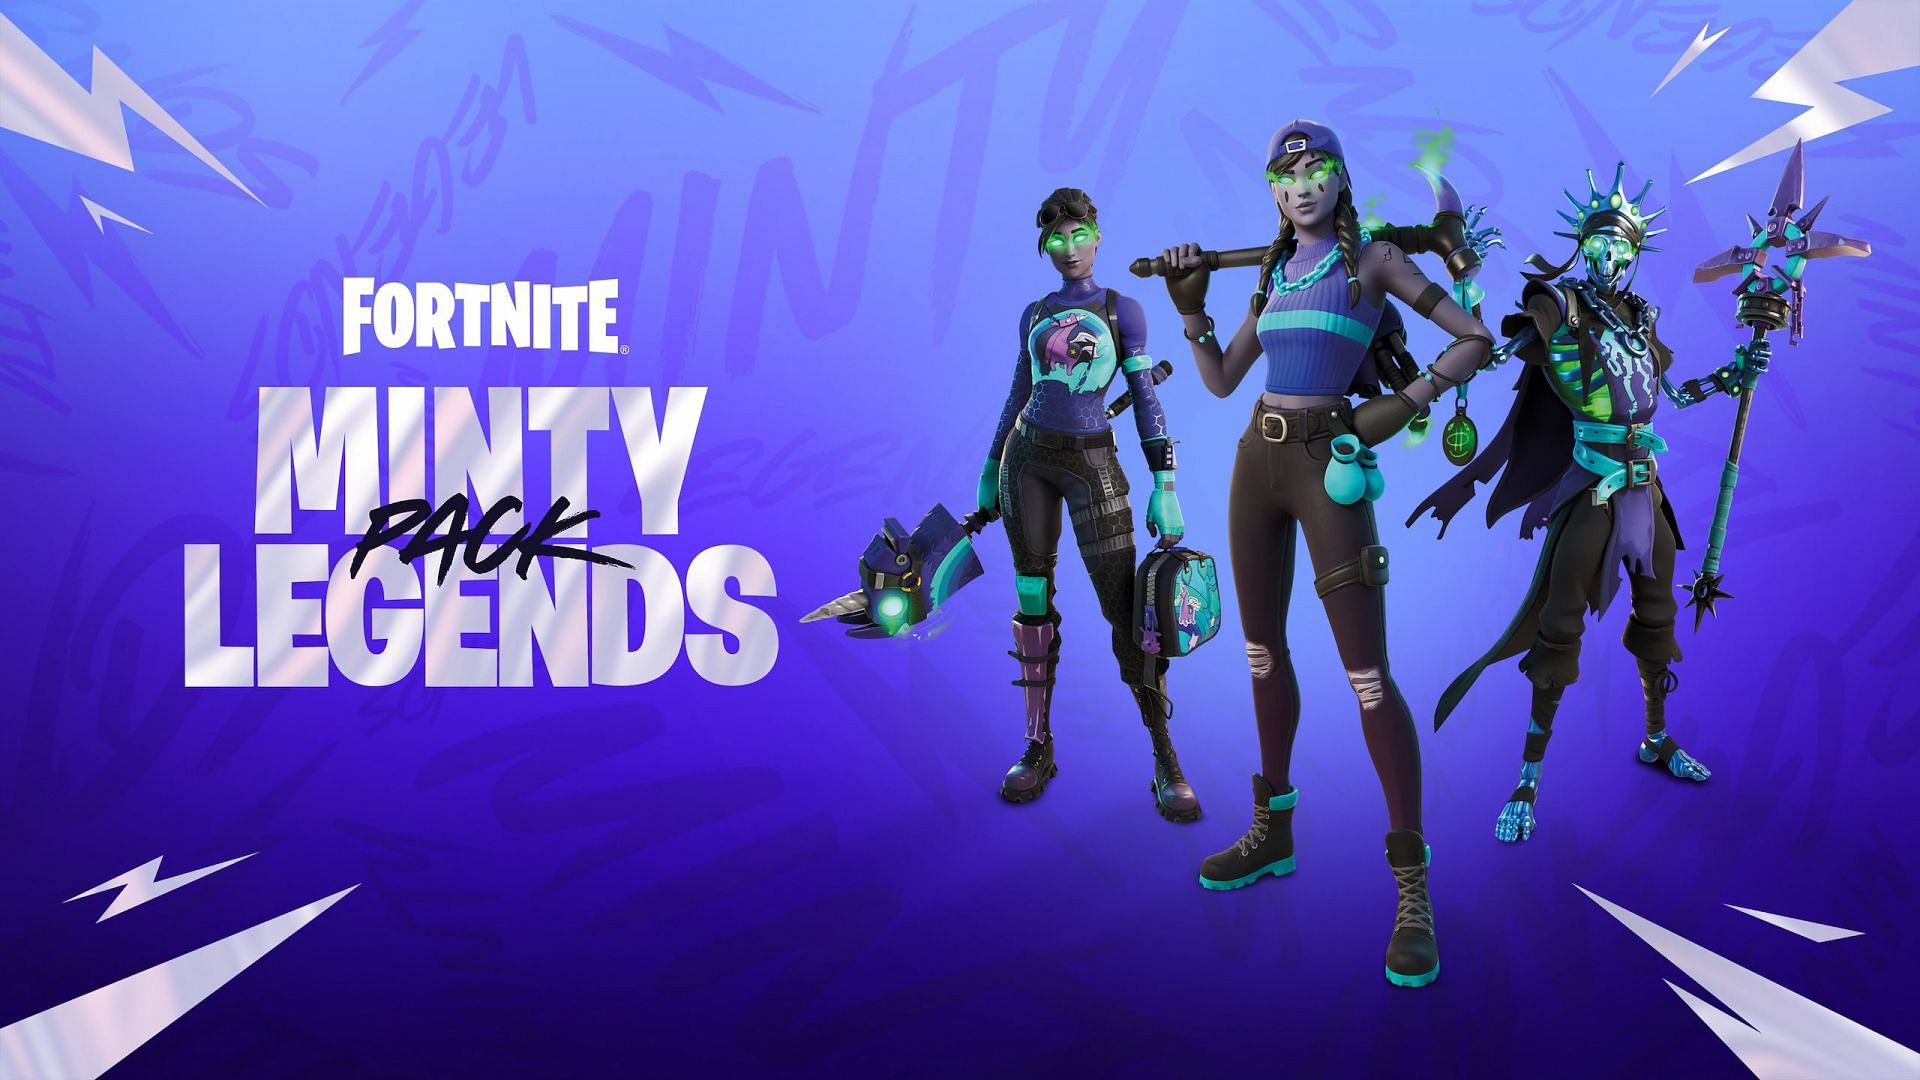 Fortnite Minty Legends is a special bundle that includes 10 different items (Image via Epic Games)